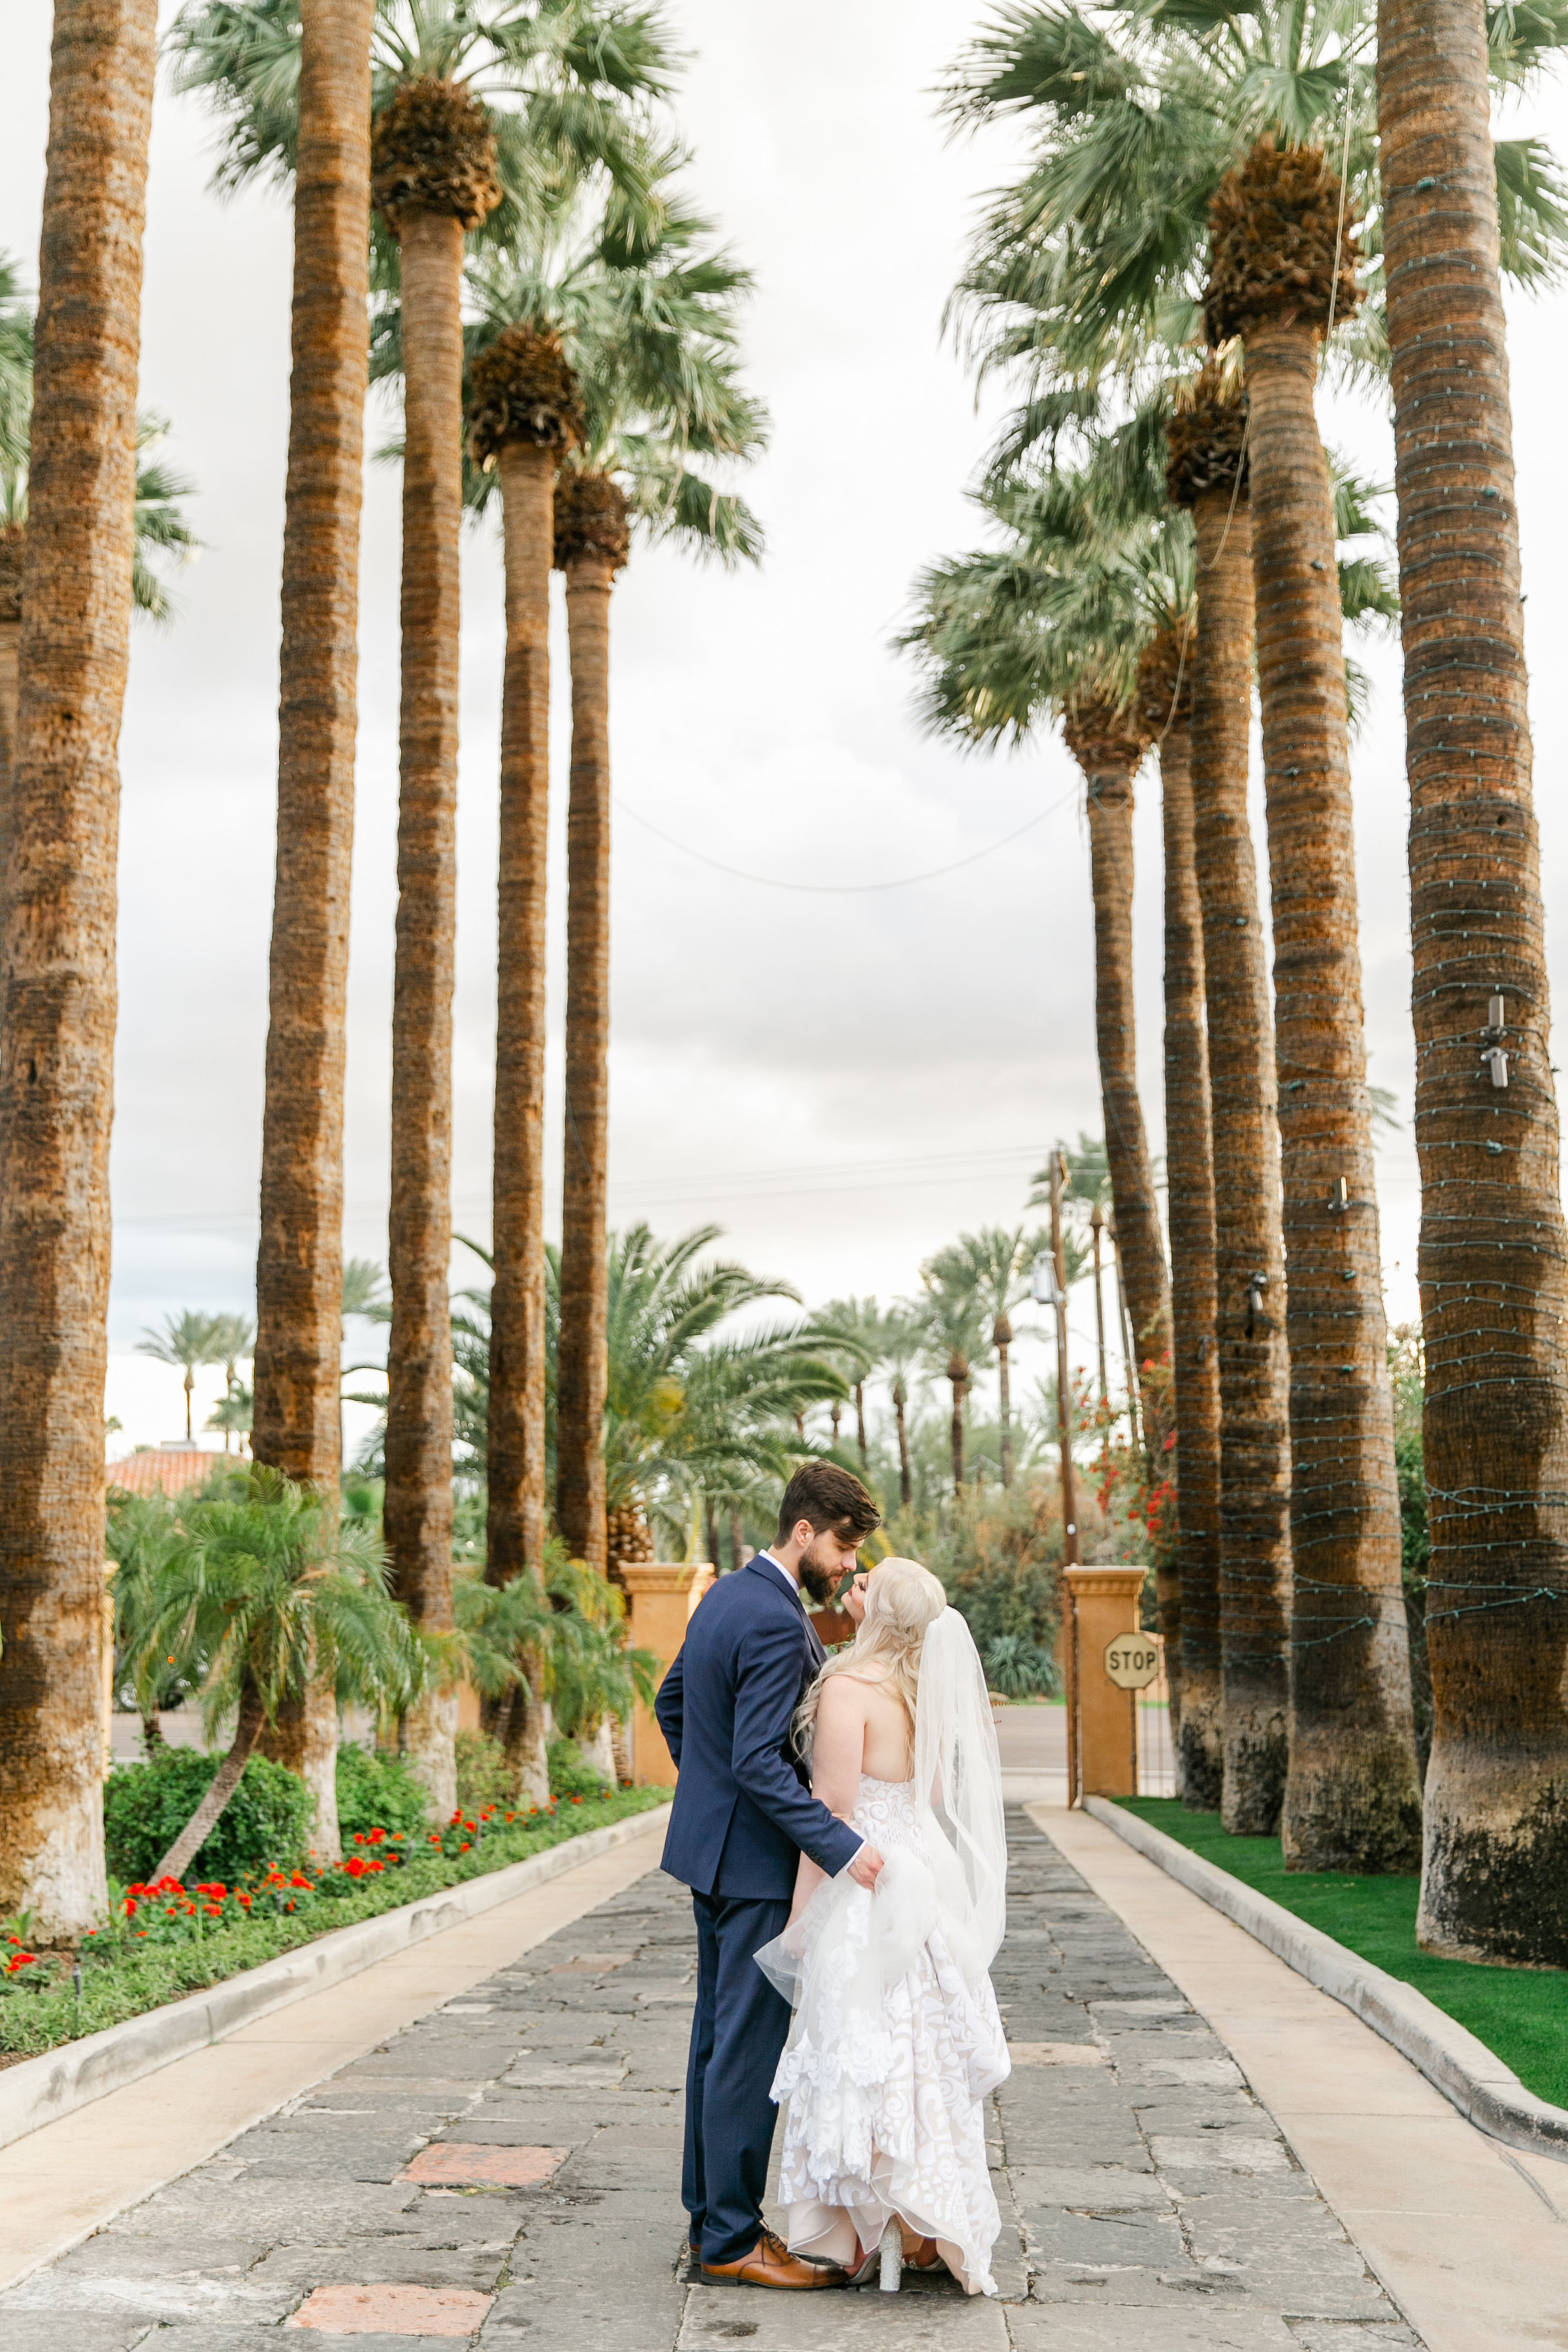 Karlie Colleen Photography - The Royal Palms Wedding - Some Like It Classic - Alex & Sam-574